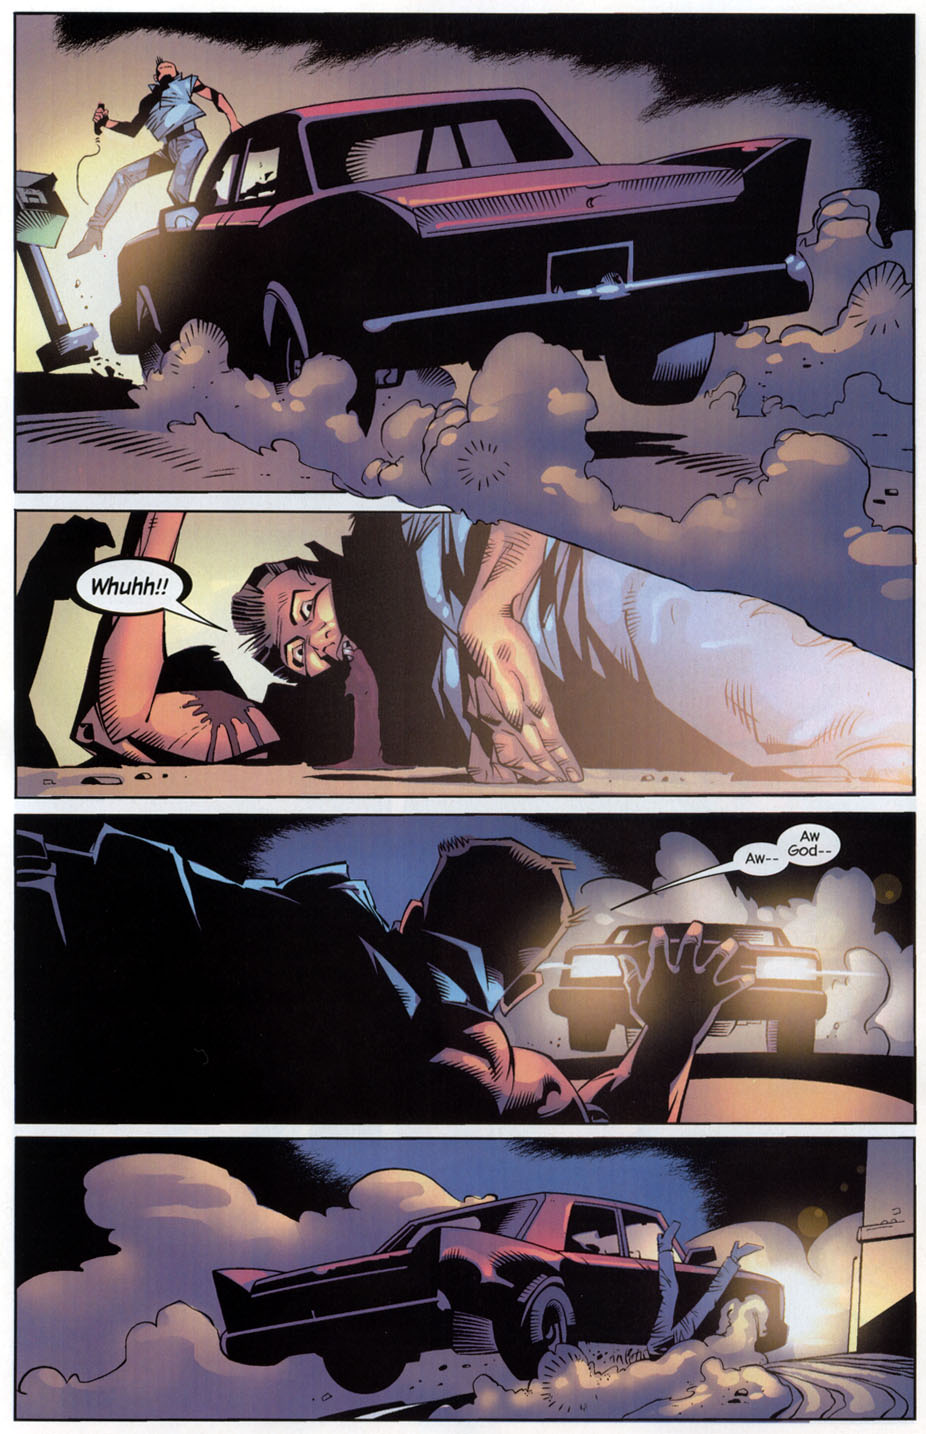 The Punisher (2001) issue 29 - Streets of Laredo #02 - Page 21